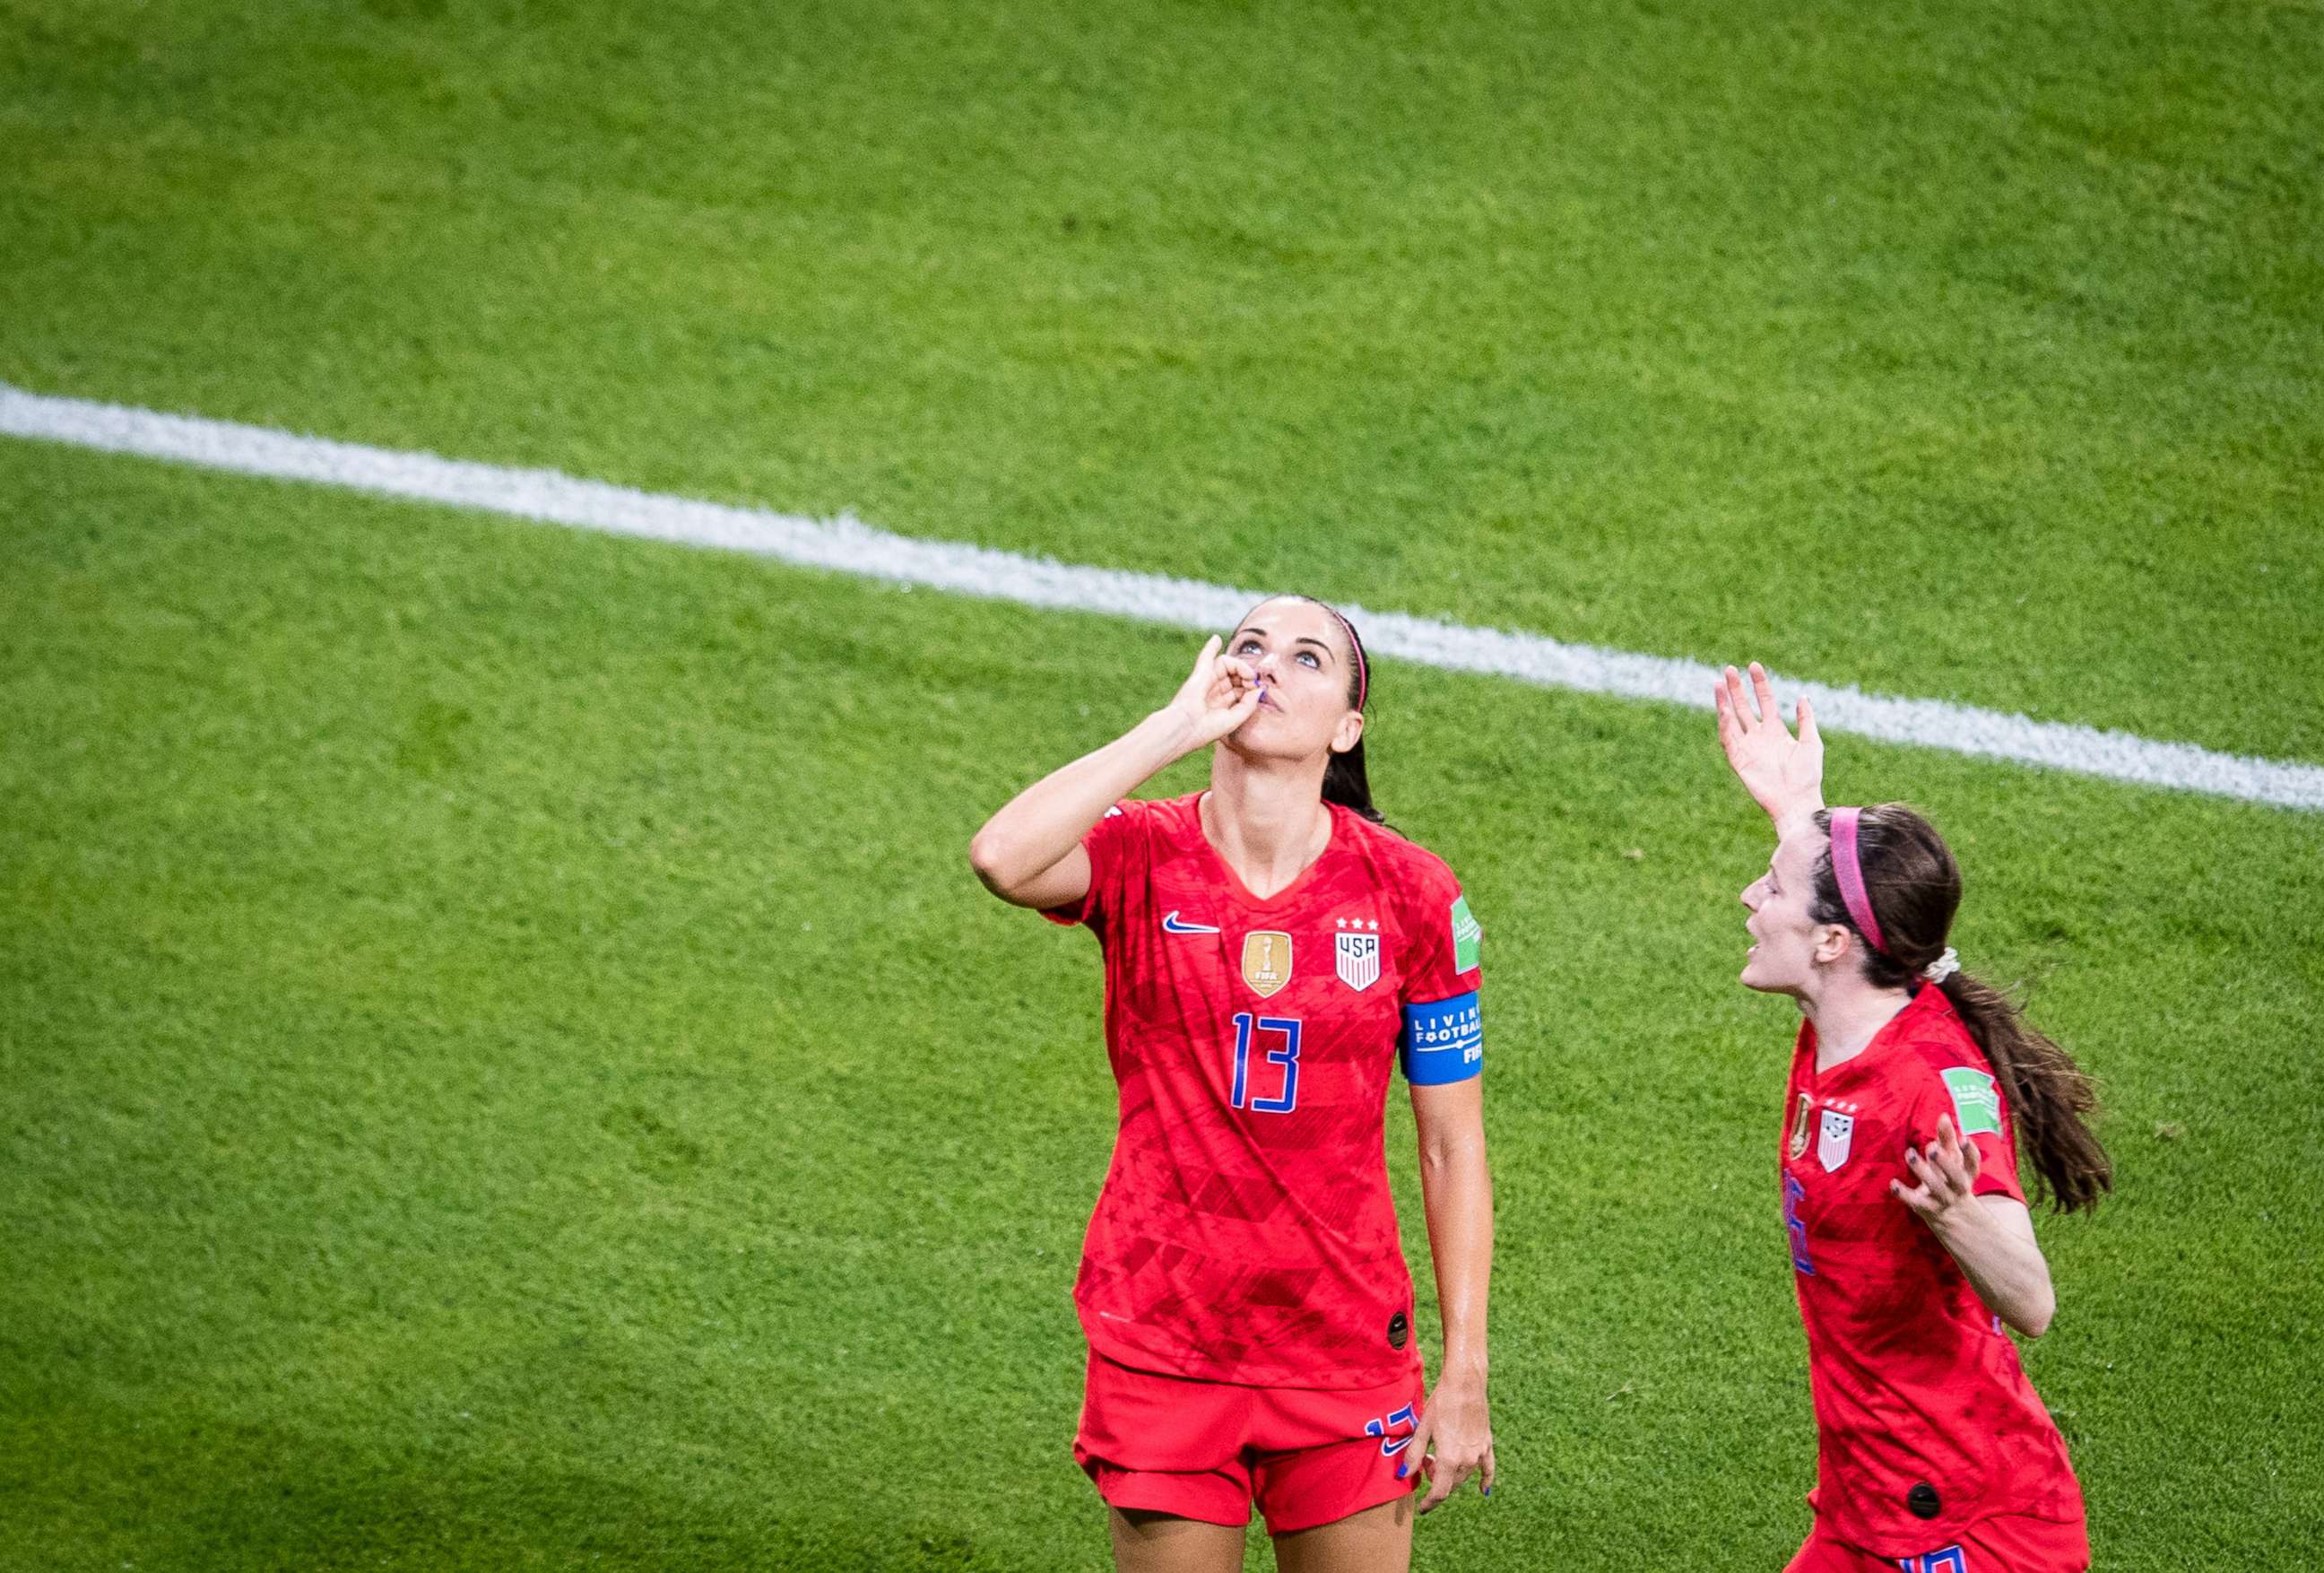 PHOTO: Alex Morgan of the United States celebrates a goal during the semifinal match between the United States and England at the 2019 FIFA Women's World Cup at Stade de Lyon in Lyon, France, July 2, 2019.